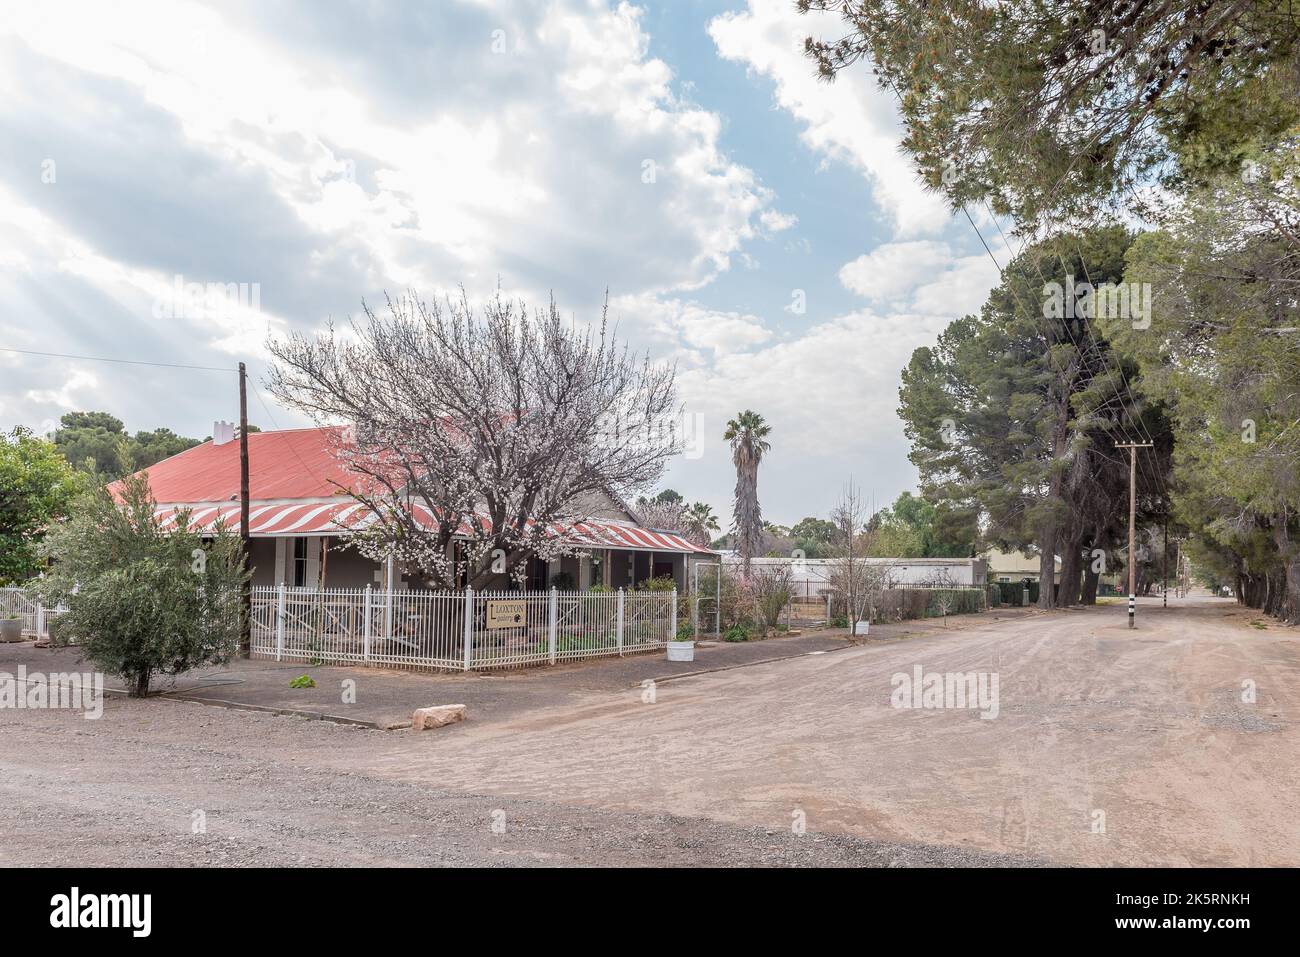 LOXTON, SOUTH AFRICA - SEP 2, 2022: A gravel street scene, with the Loxton Gallery, in Loxton in the Northern Cape Karoo. A flowering pear tree is vis Stock Photo